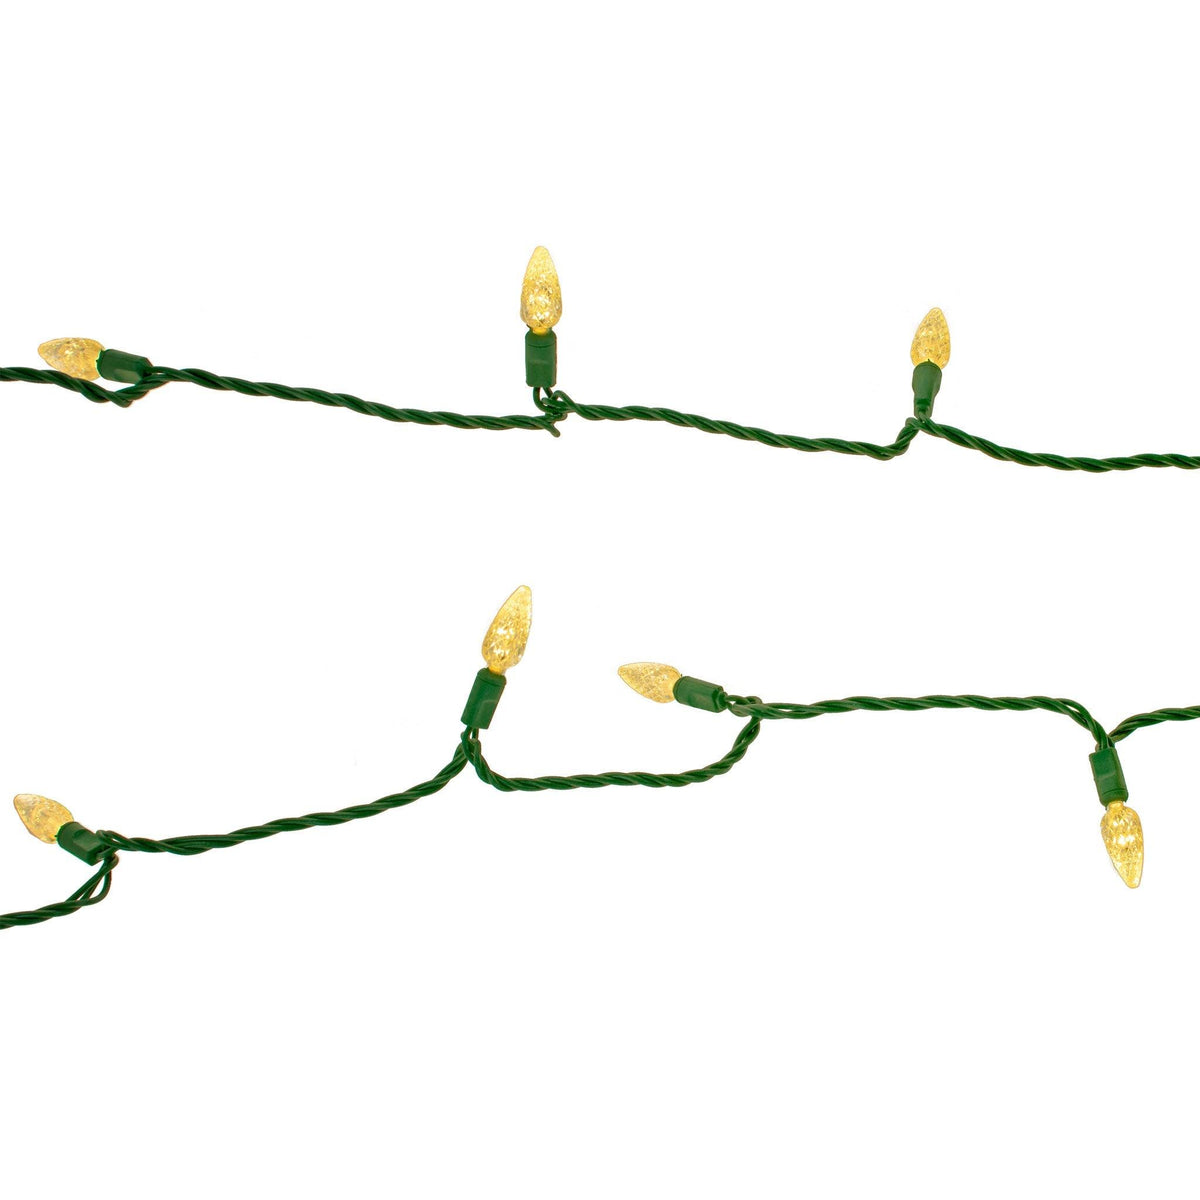 Purchase a brand new set of Lee Display's C6 LED Clear Warm White Christmas String Lights with Green Wire.  Energy-efficient lighting for outdoor use